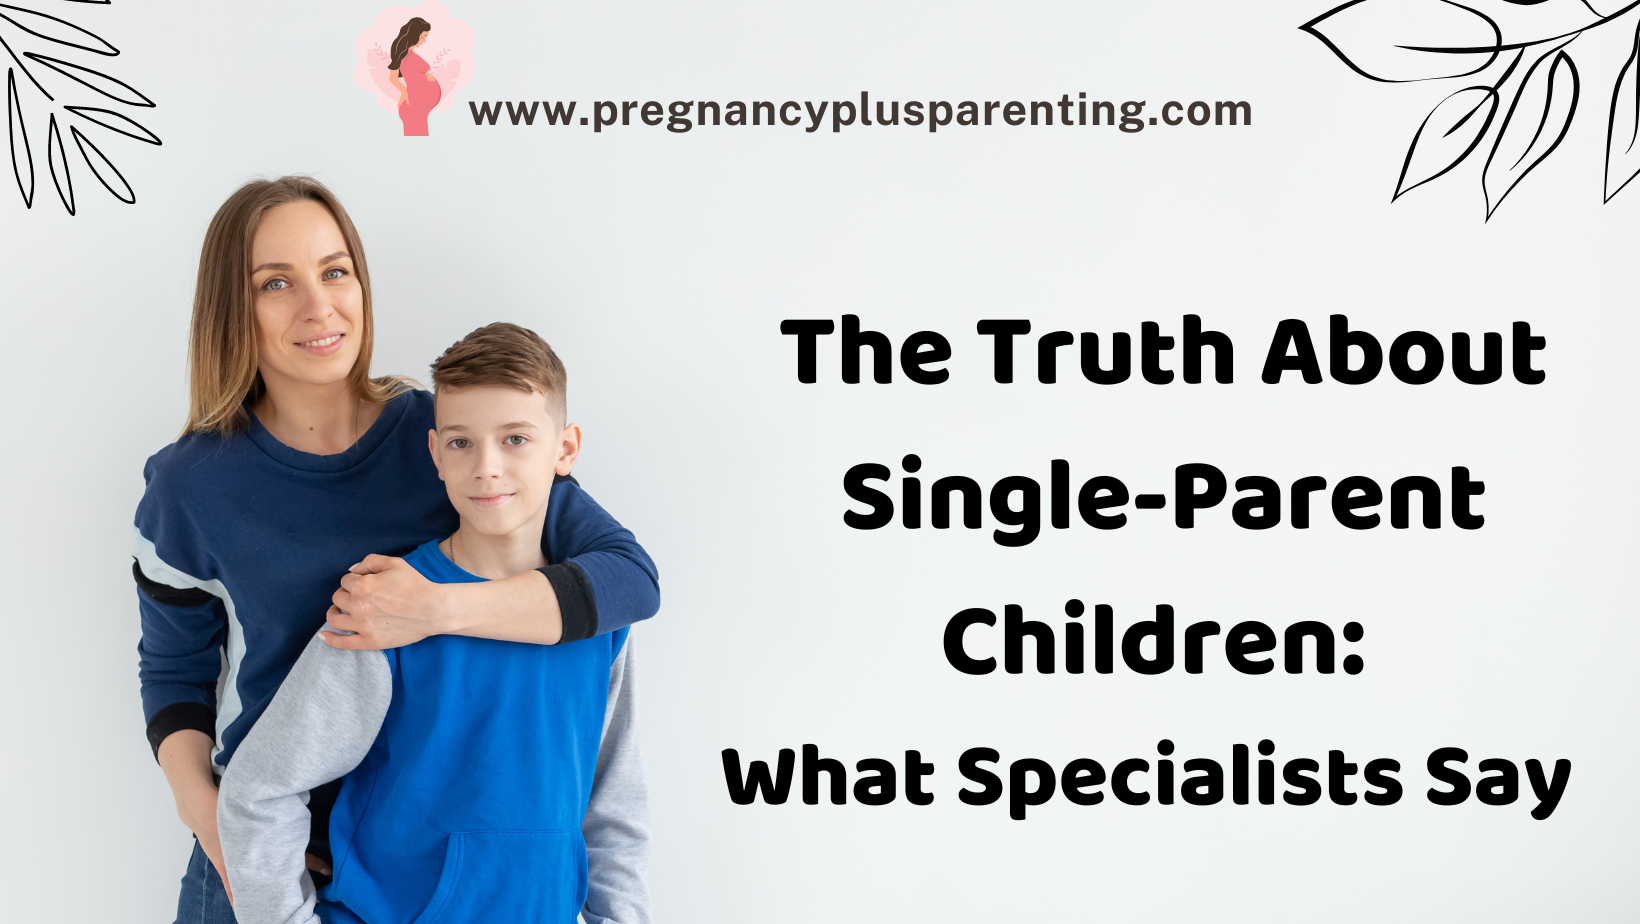 The Truth About Single-Parent Children: What Specialists Say